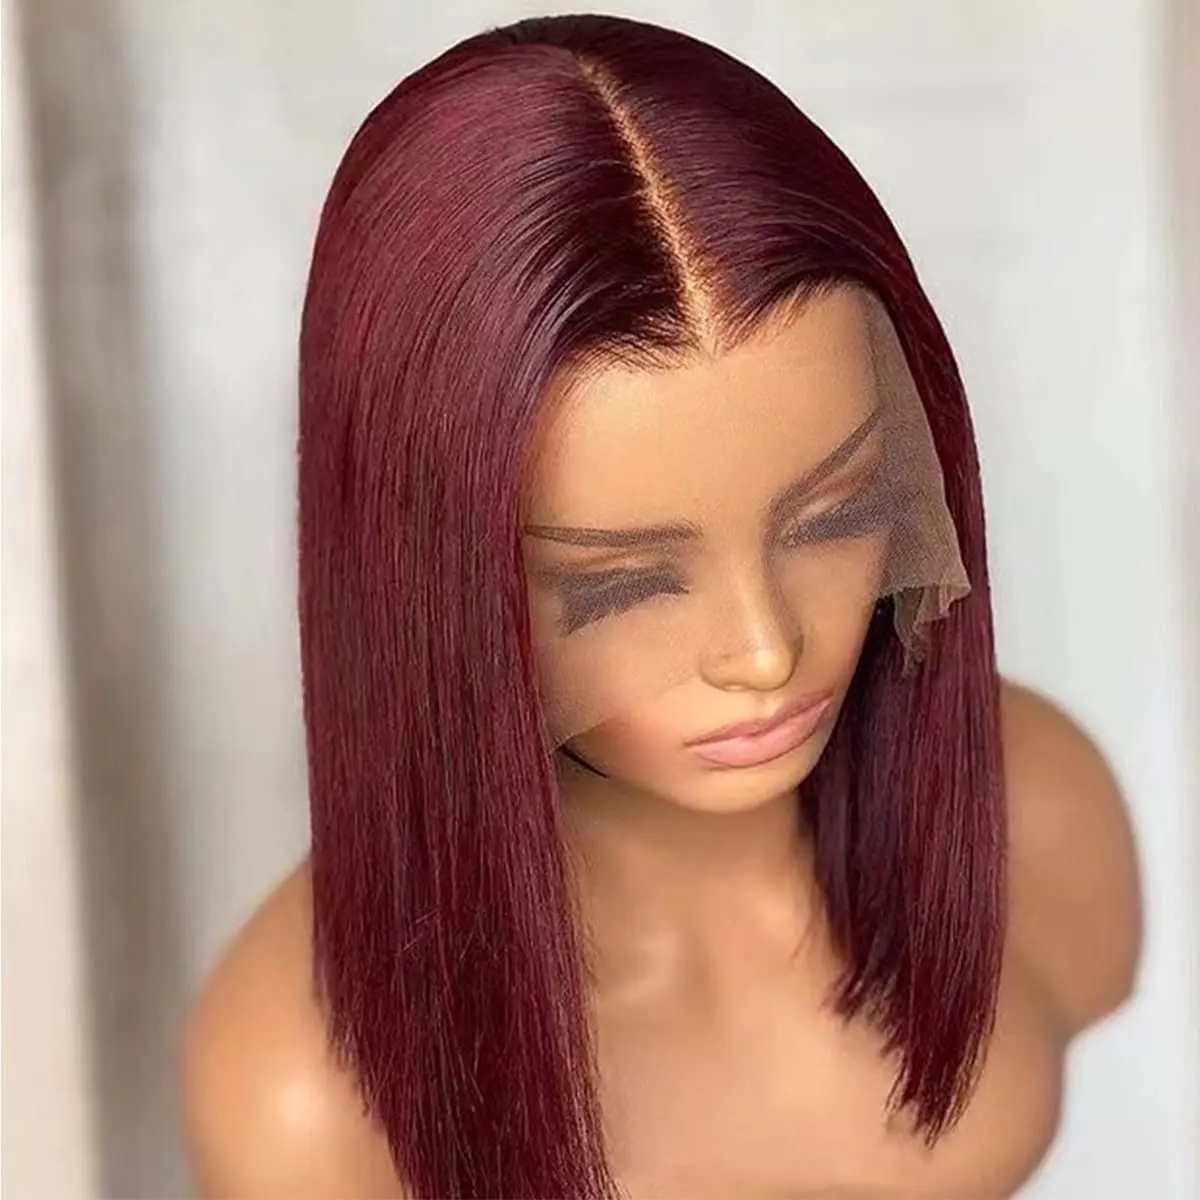 Short Bob Wig Lace Front Human Hair Wigs For Black Women Colored Burgundy Lace Front Wig 99J Red Straight 13x4 Lace Frontal Wigs